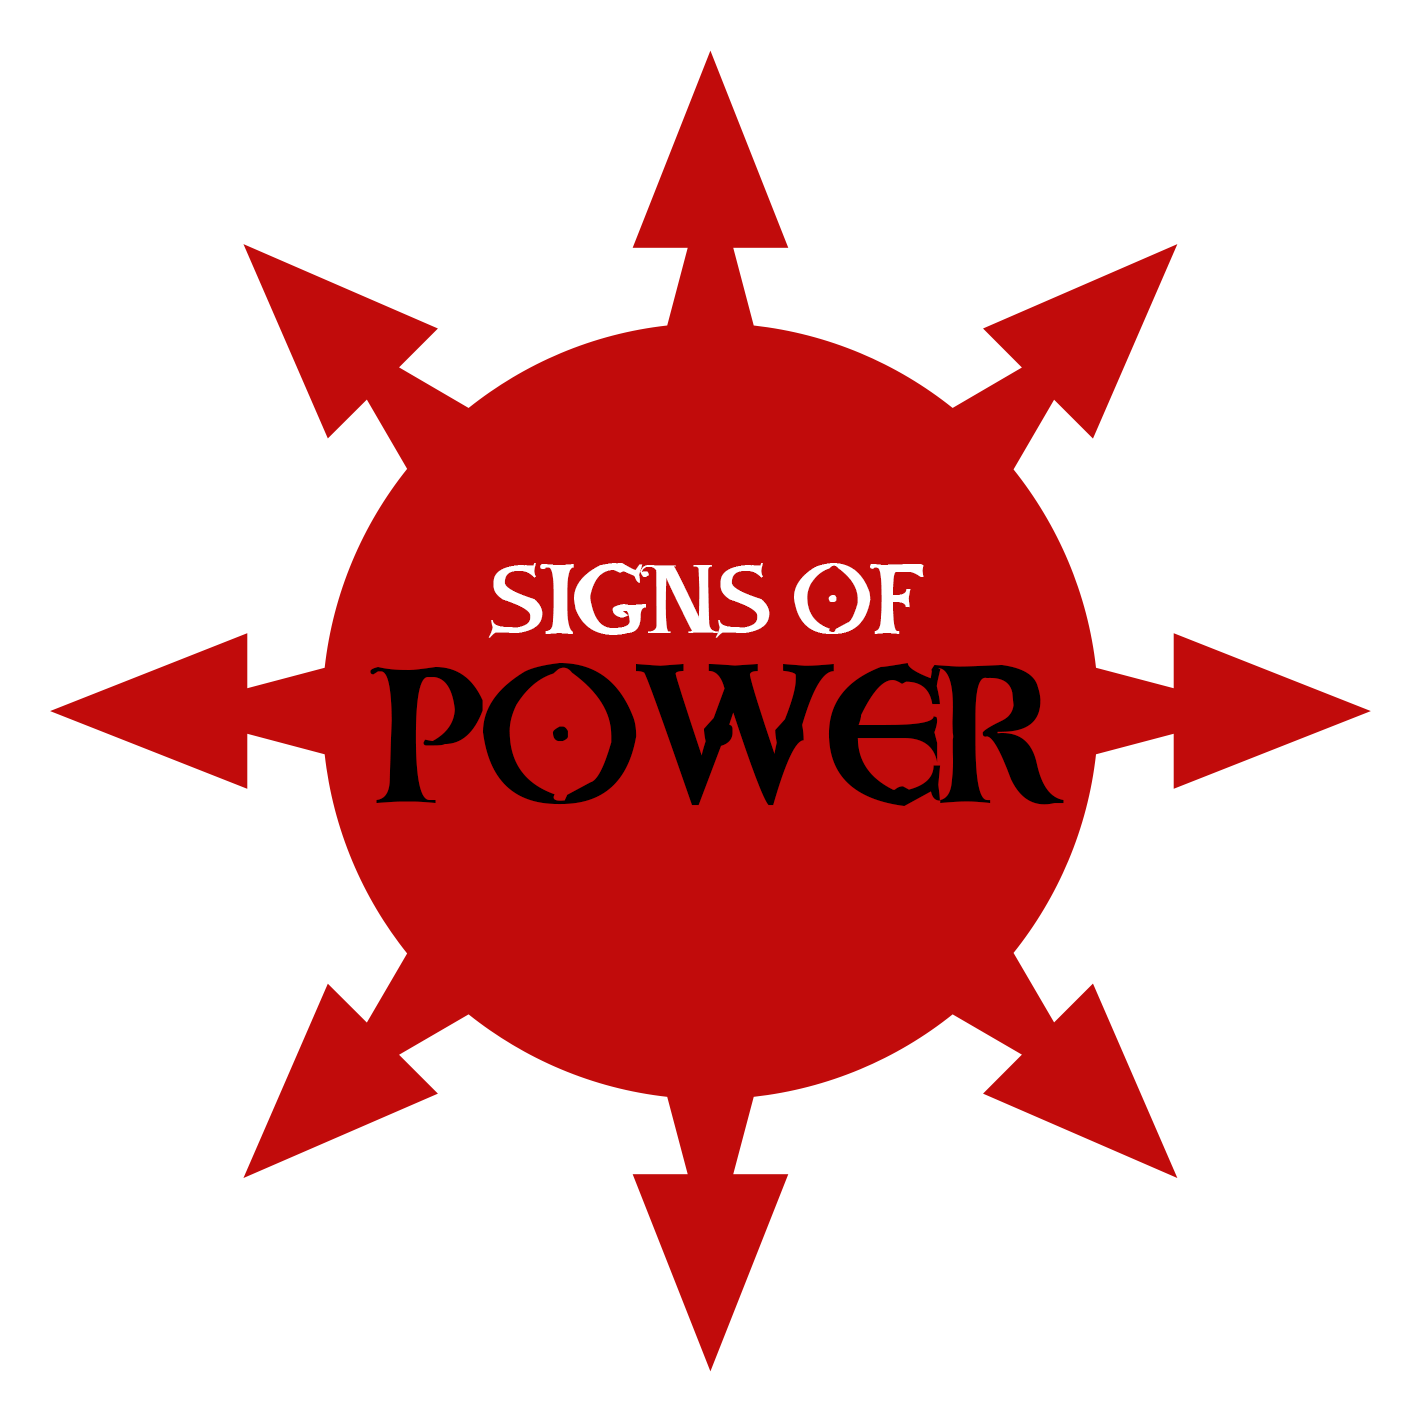 Signs of power